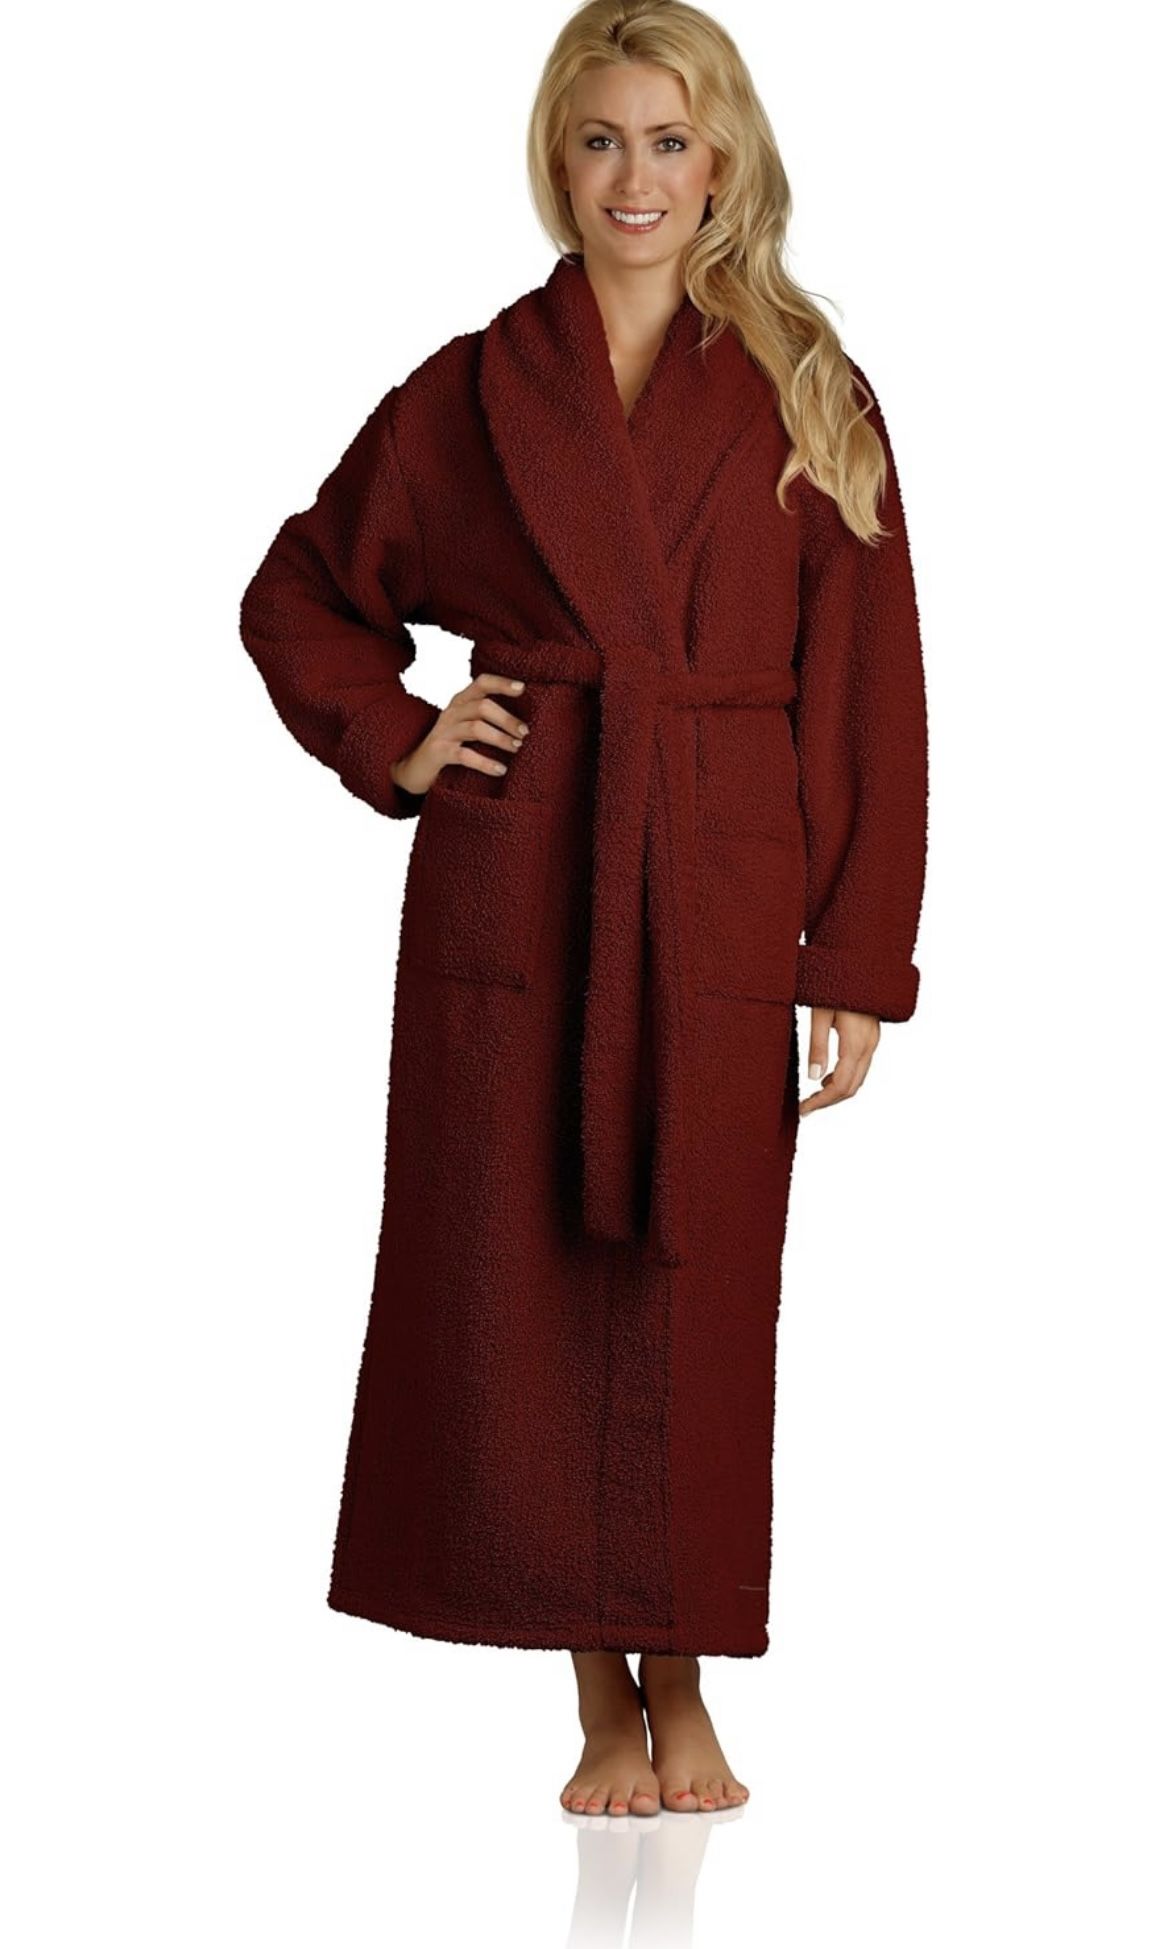 Plush Microfiber Robe - Soft, Warm, and Lightweight - Full Length - Cranberry size L